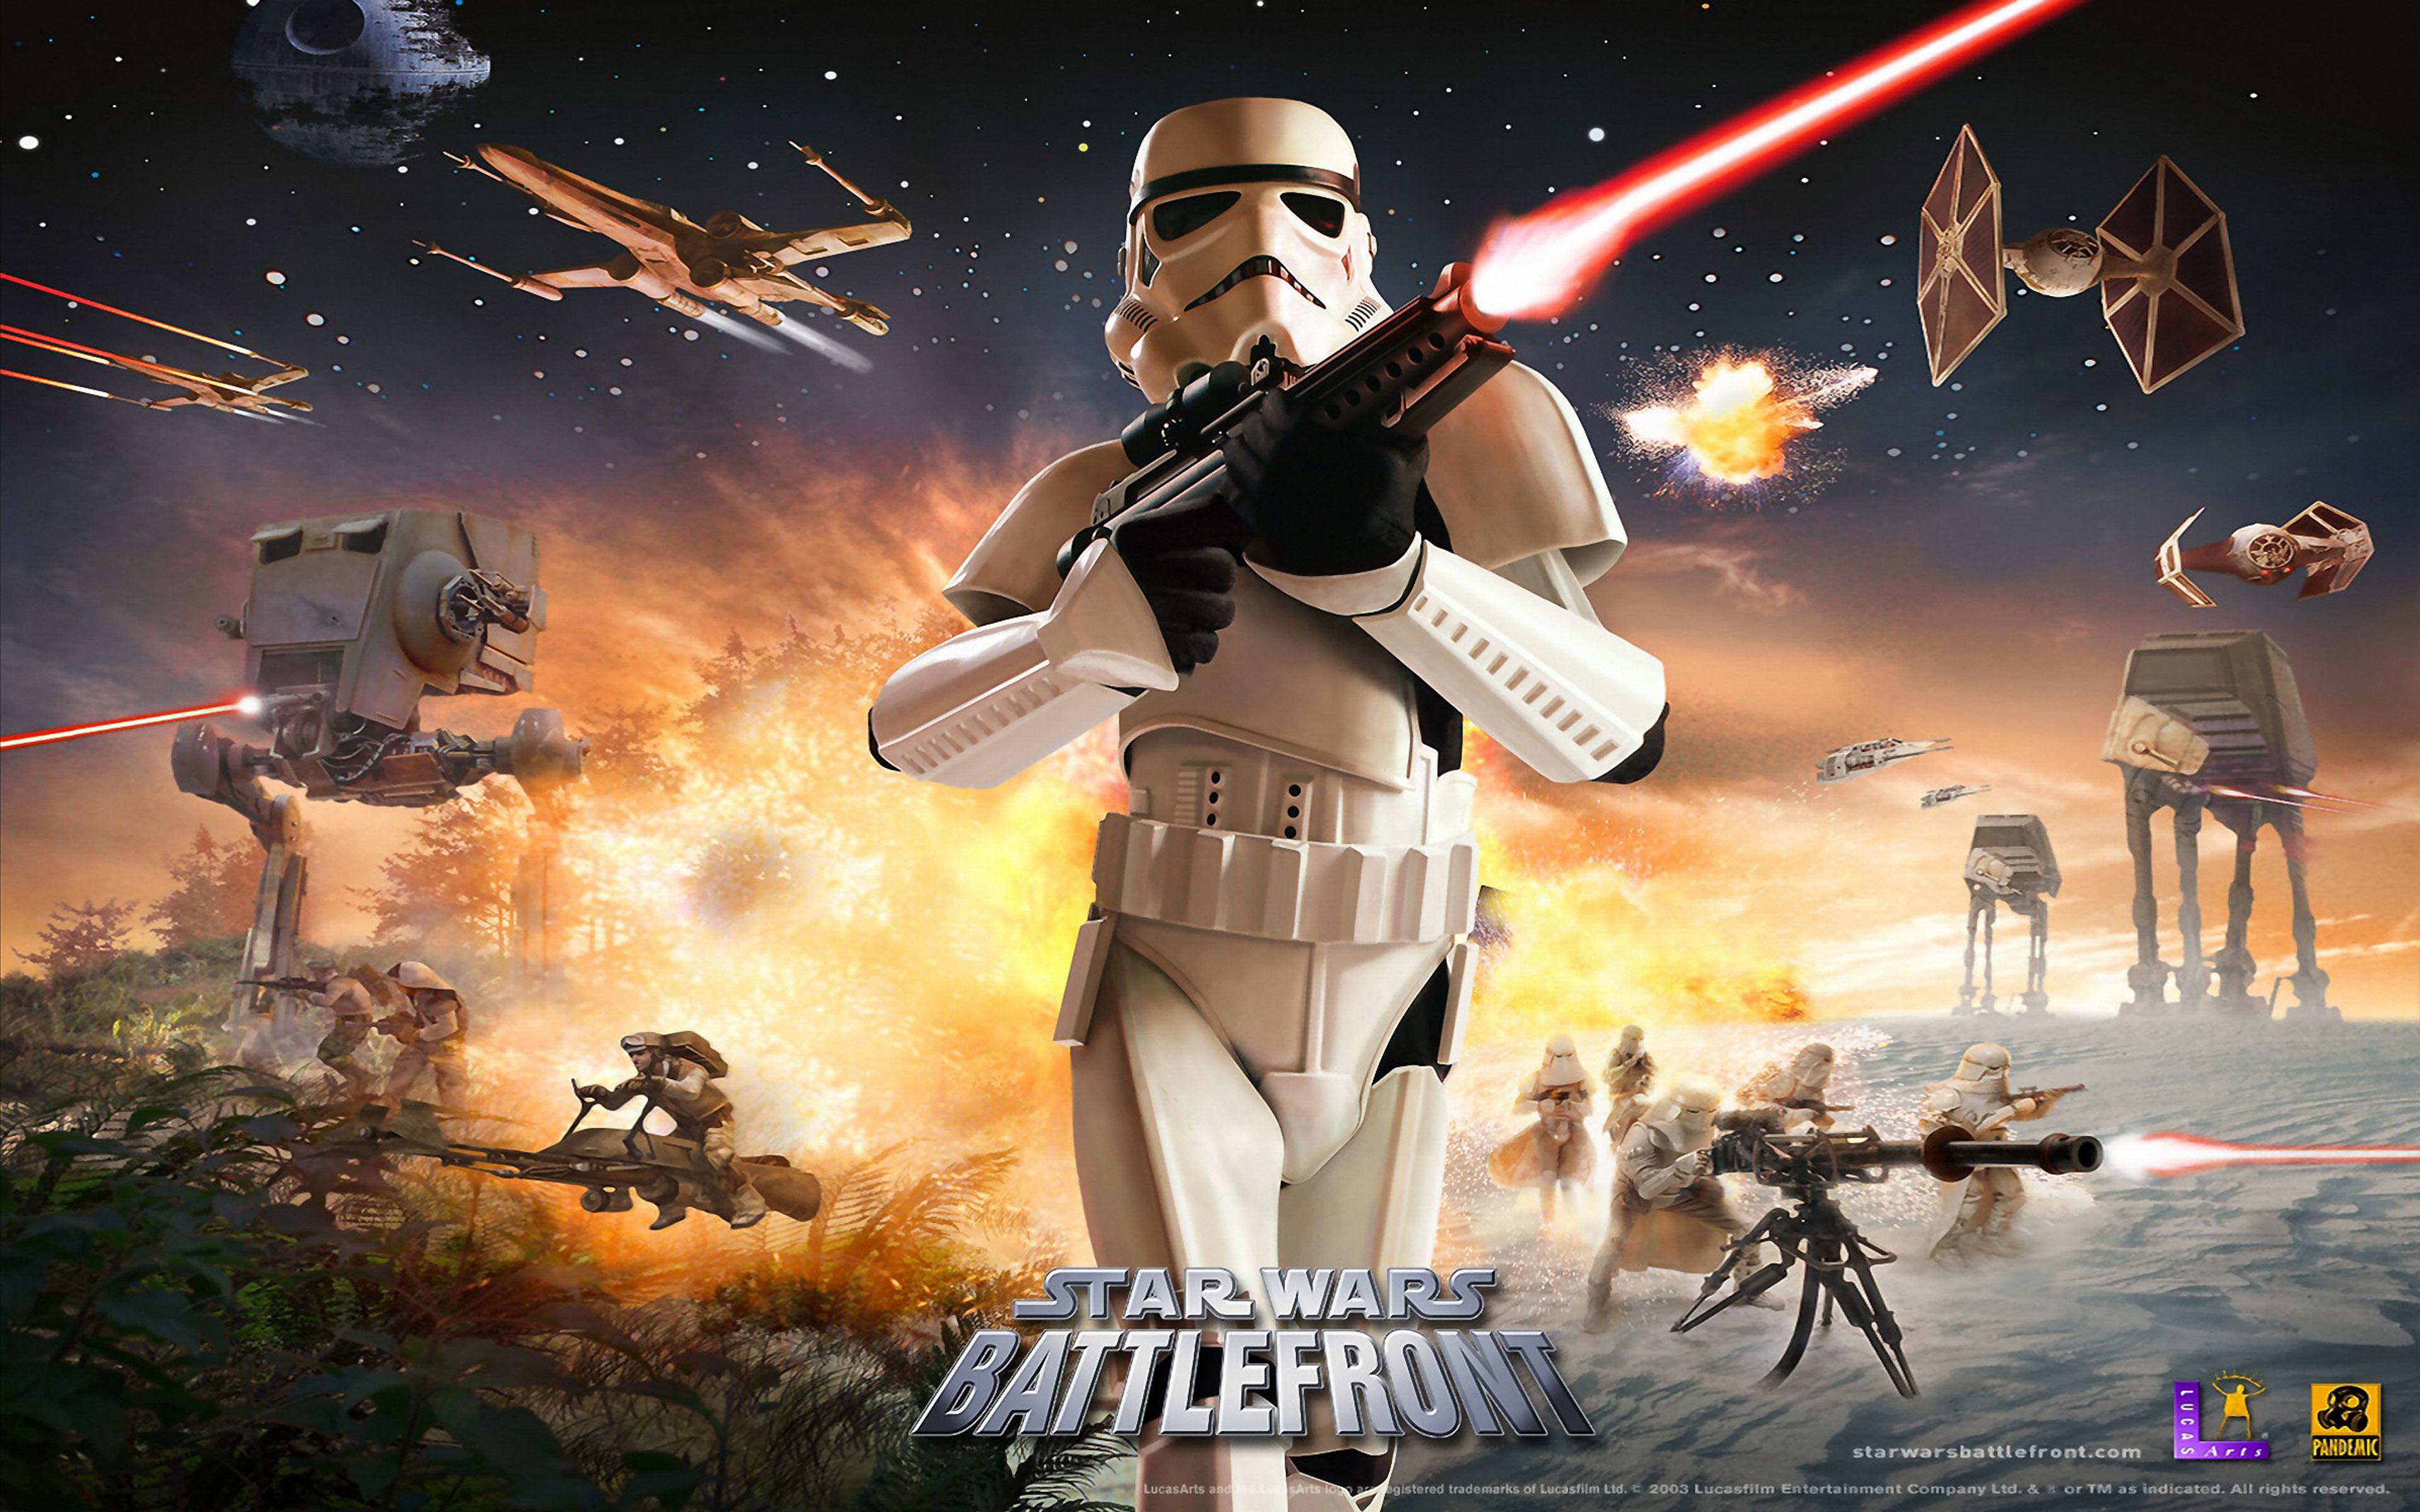 Battlefront classic collection 2024. Star Wars Battlefront 1. Star Wars Battlefront 2 2004. Star Wars Battlefront 2004. Star Wars Battlefront 2003.